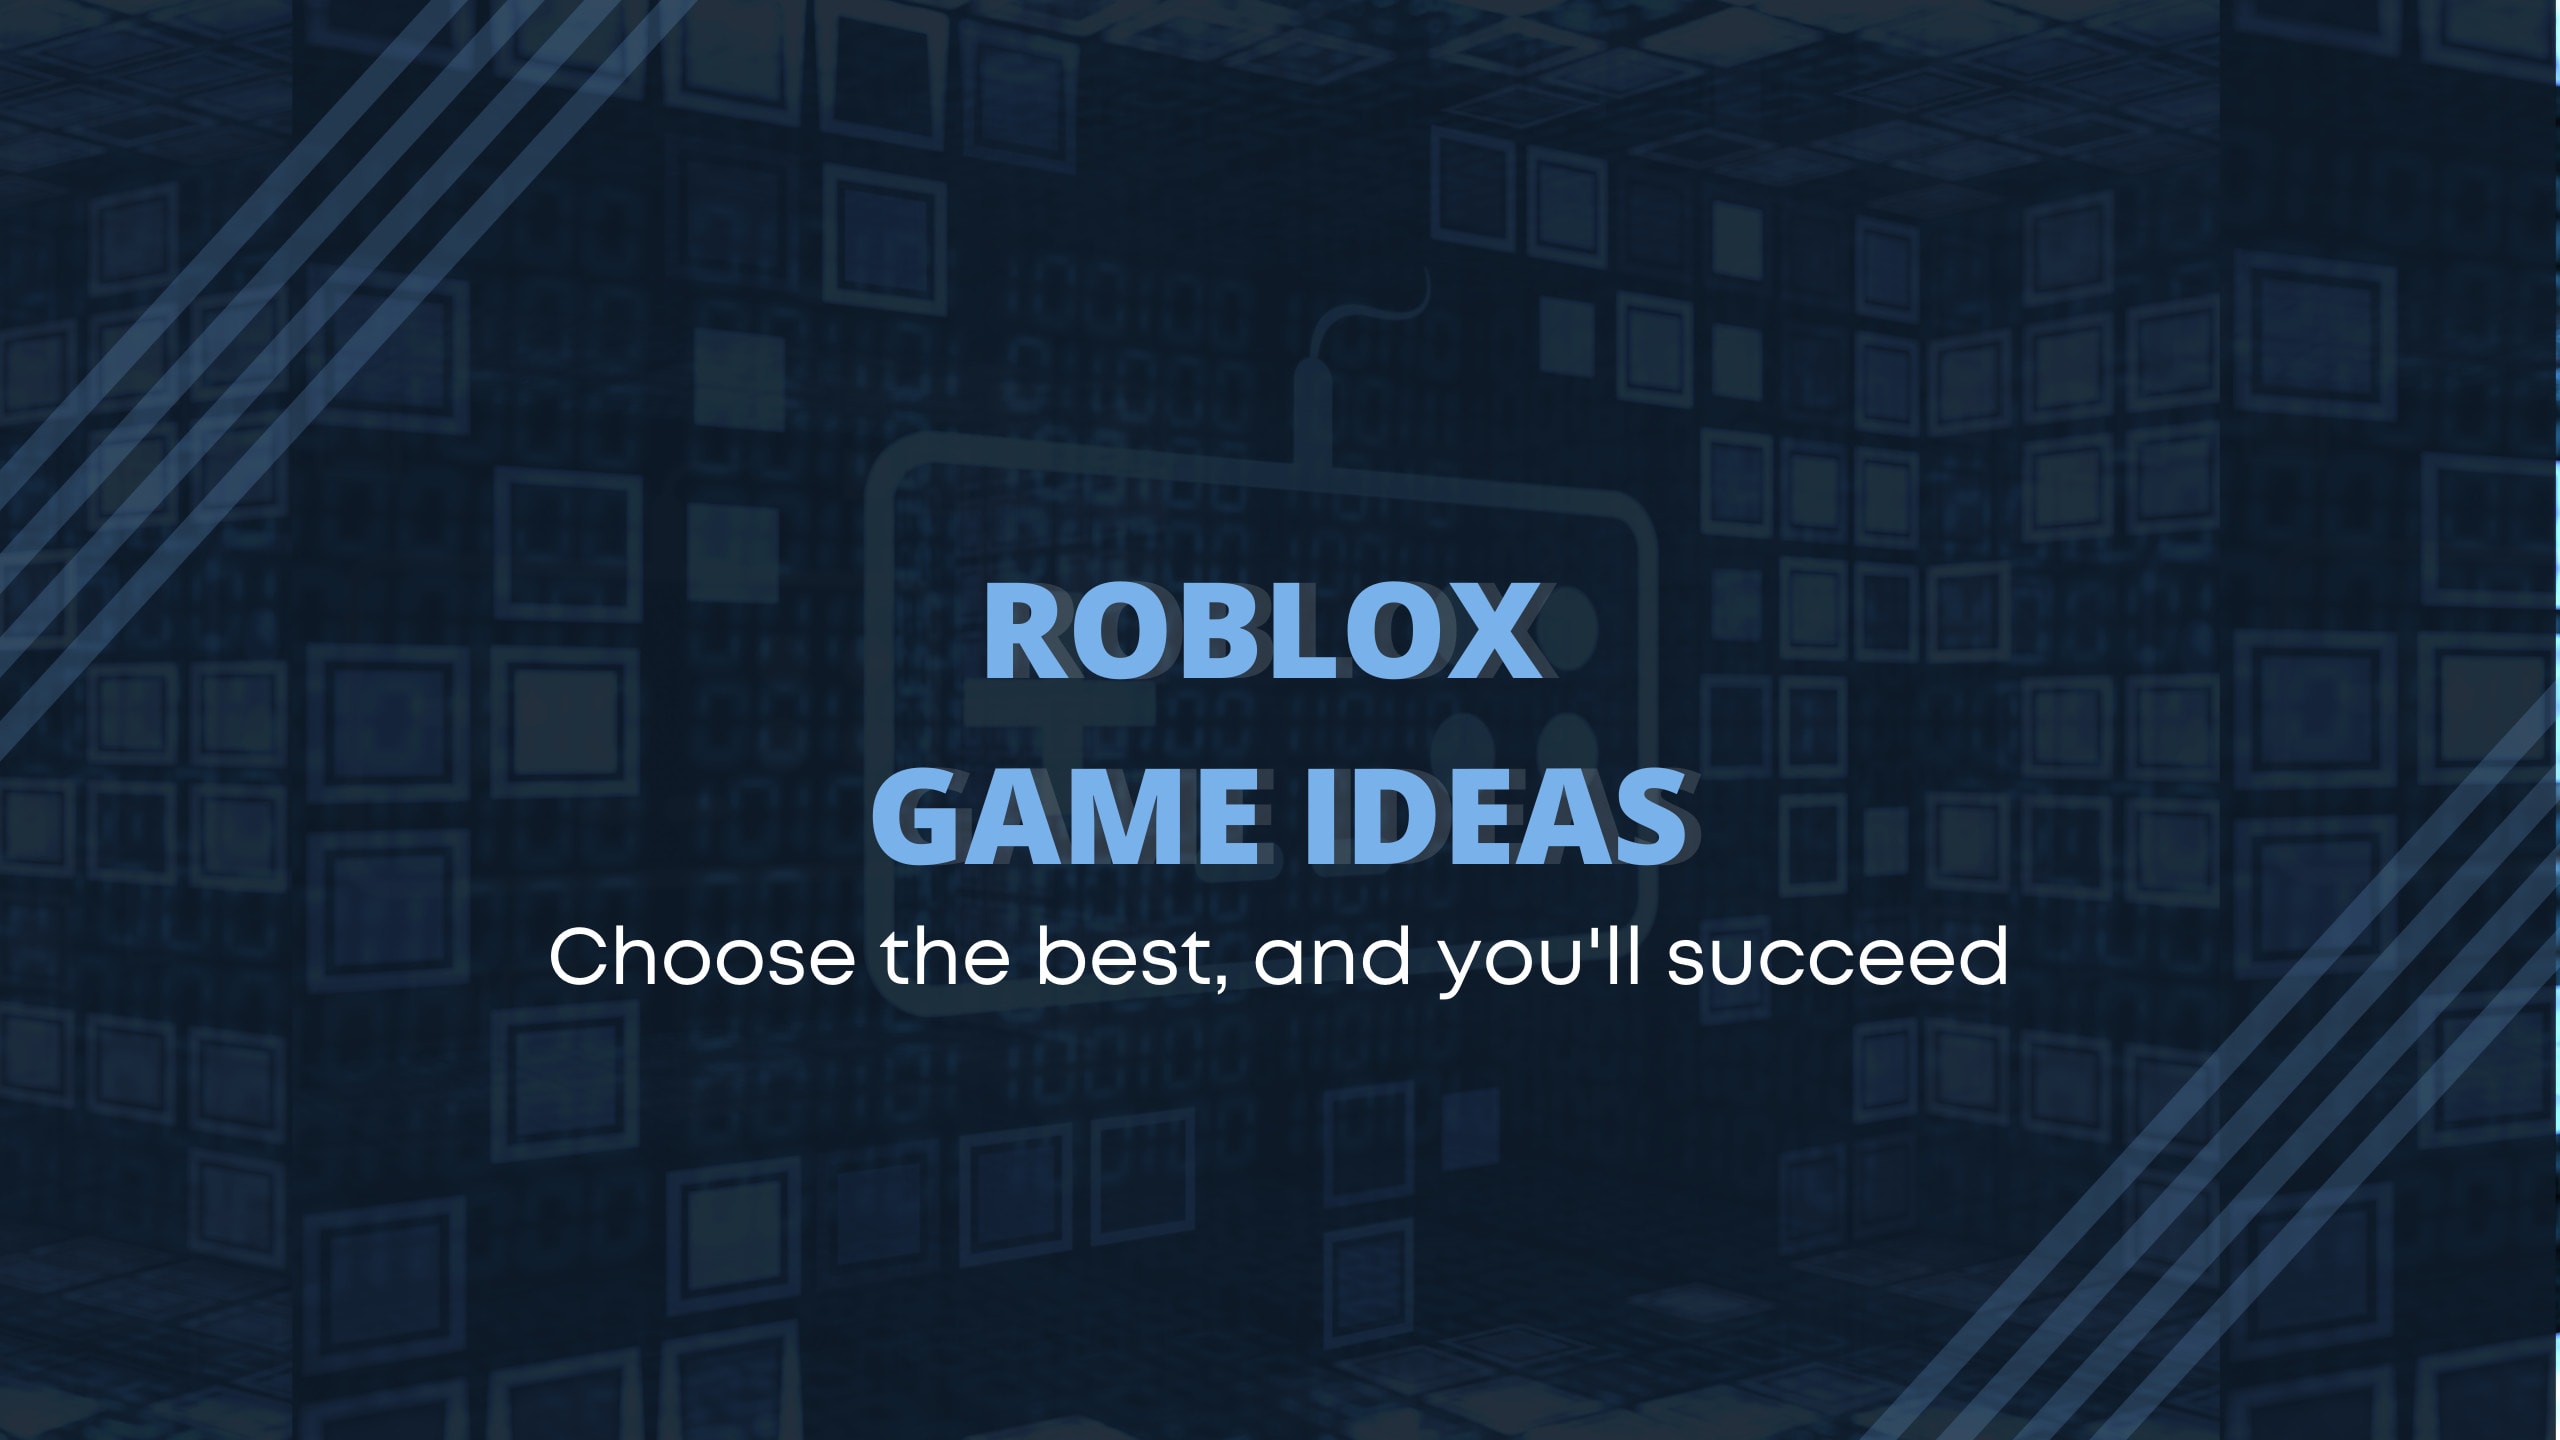 Give You Good Ideas For A Roblox Game By Dbyoungjr Fiverr - cool ides for roblox games